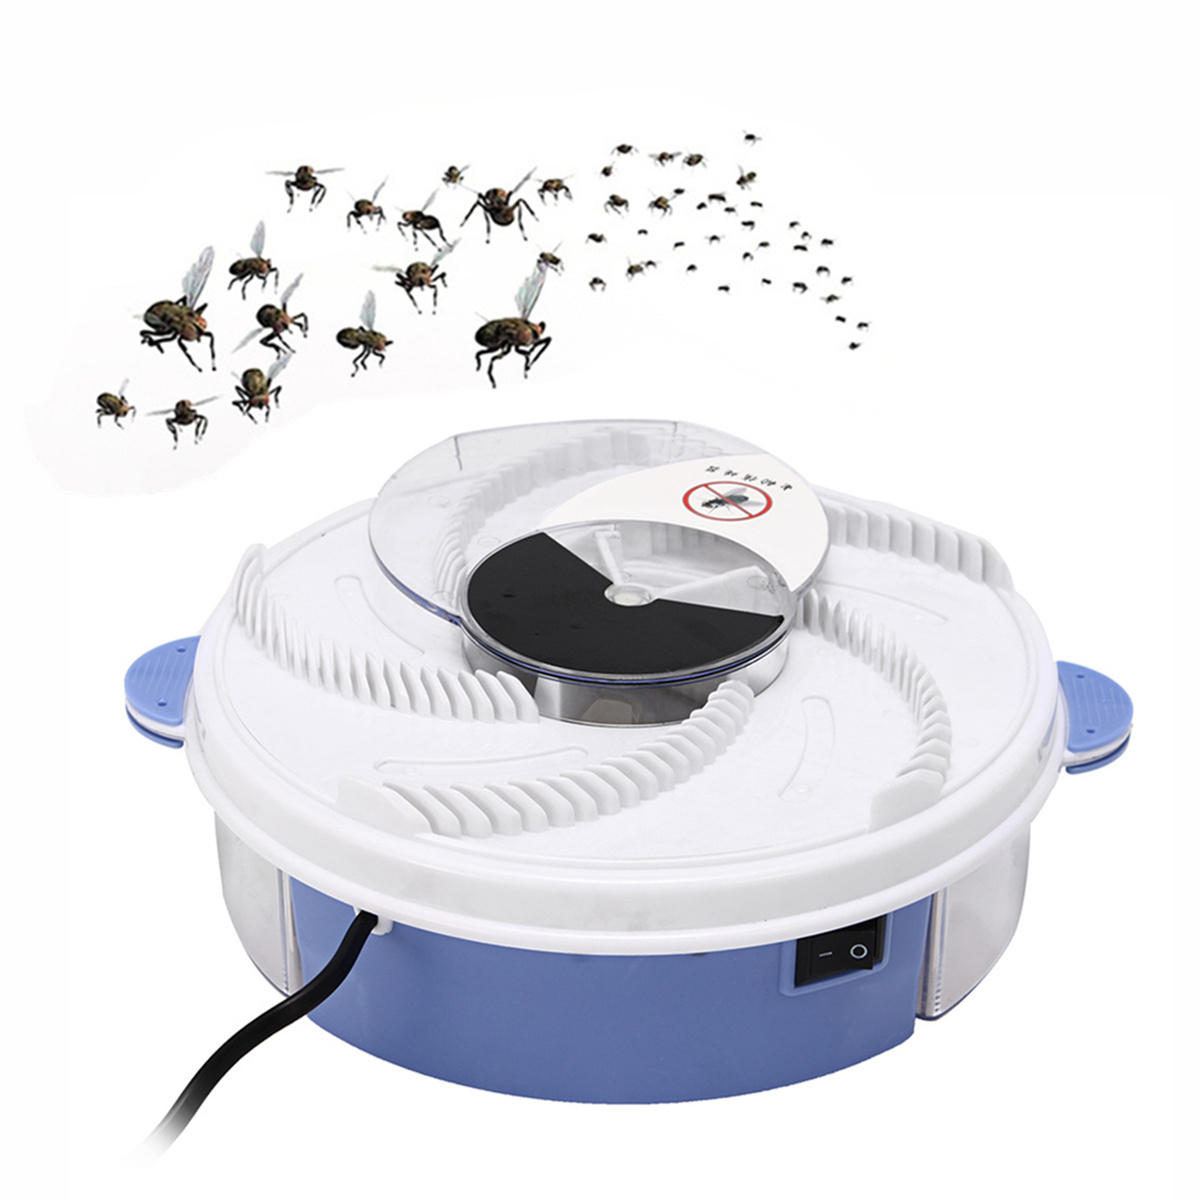 Electric Fly Trap Catcher Killer Devices Eco-friendly Home Anti-Fly Pests Control